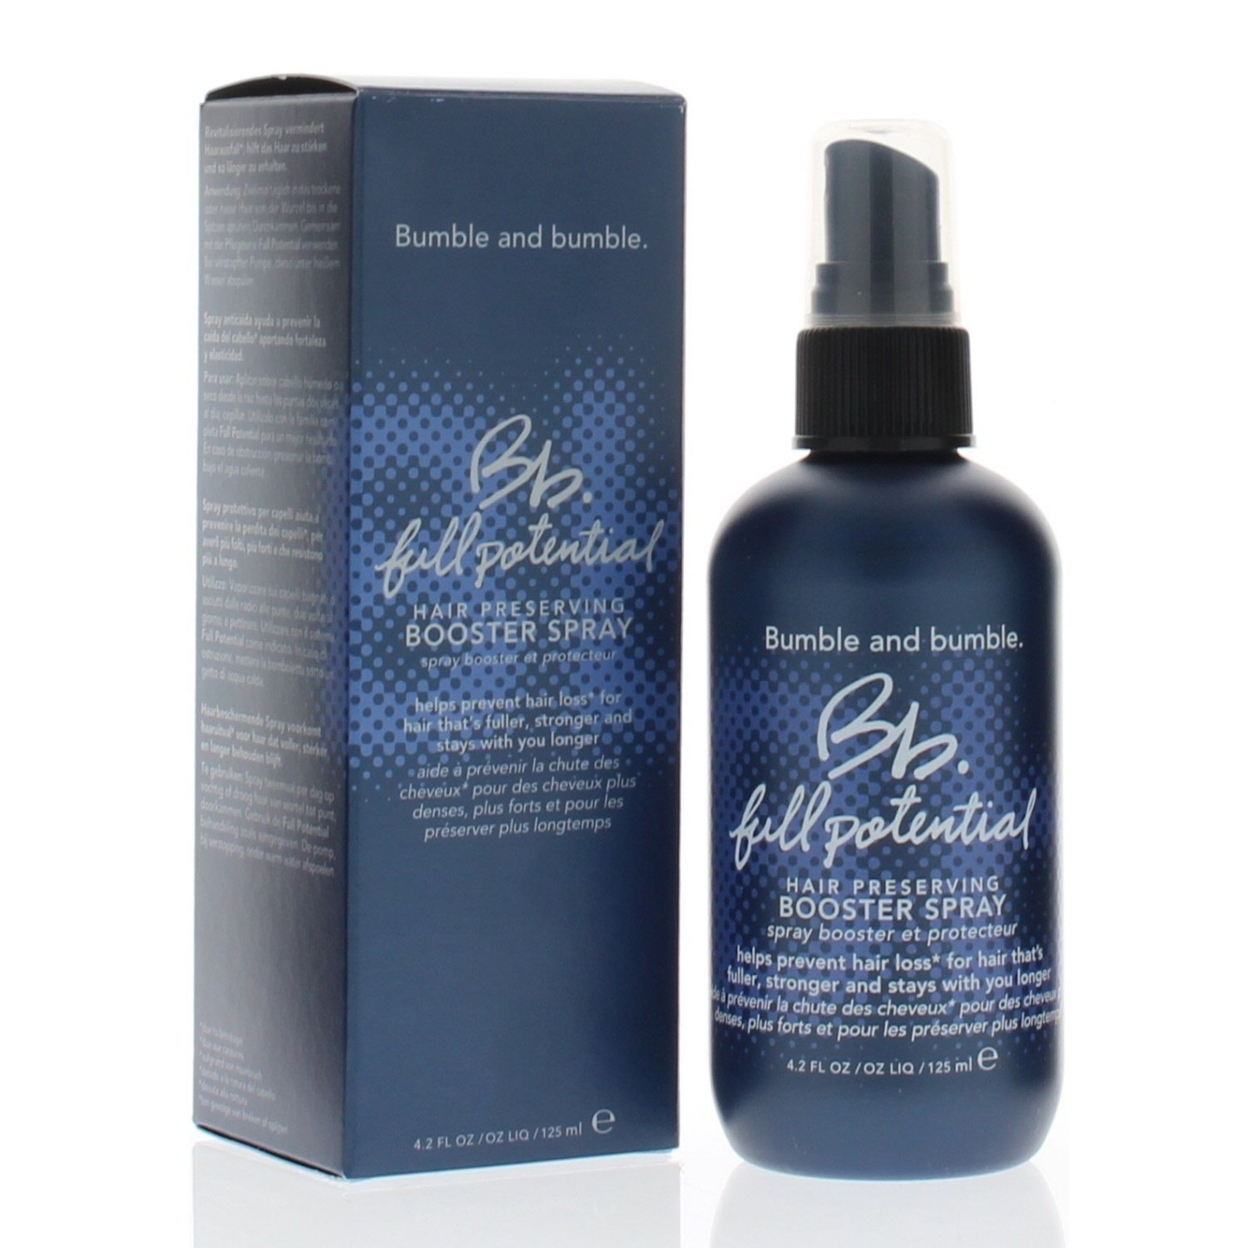 Bumble And Bumble Bb. Full Potential Hair Preserving Booster Spray 4.2oz/125ml